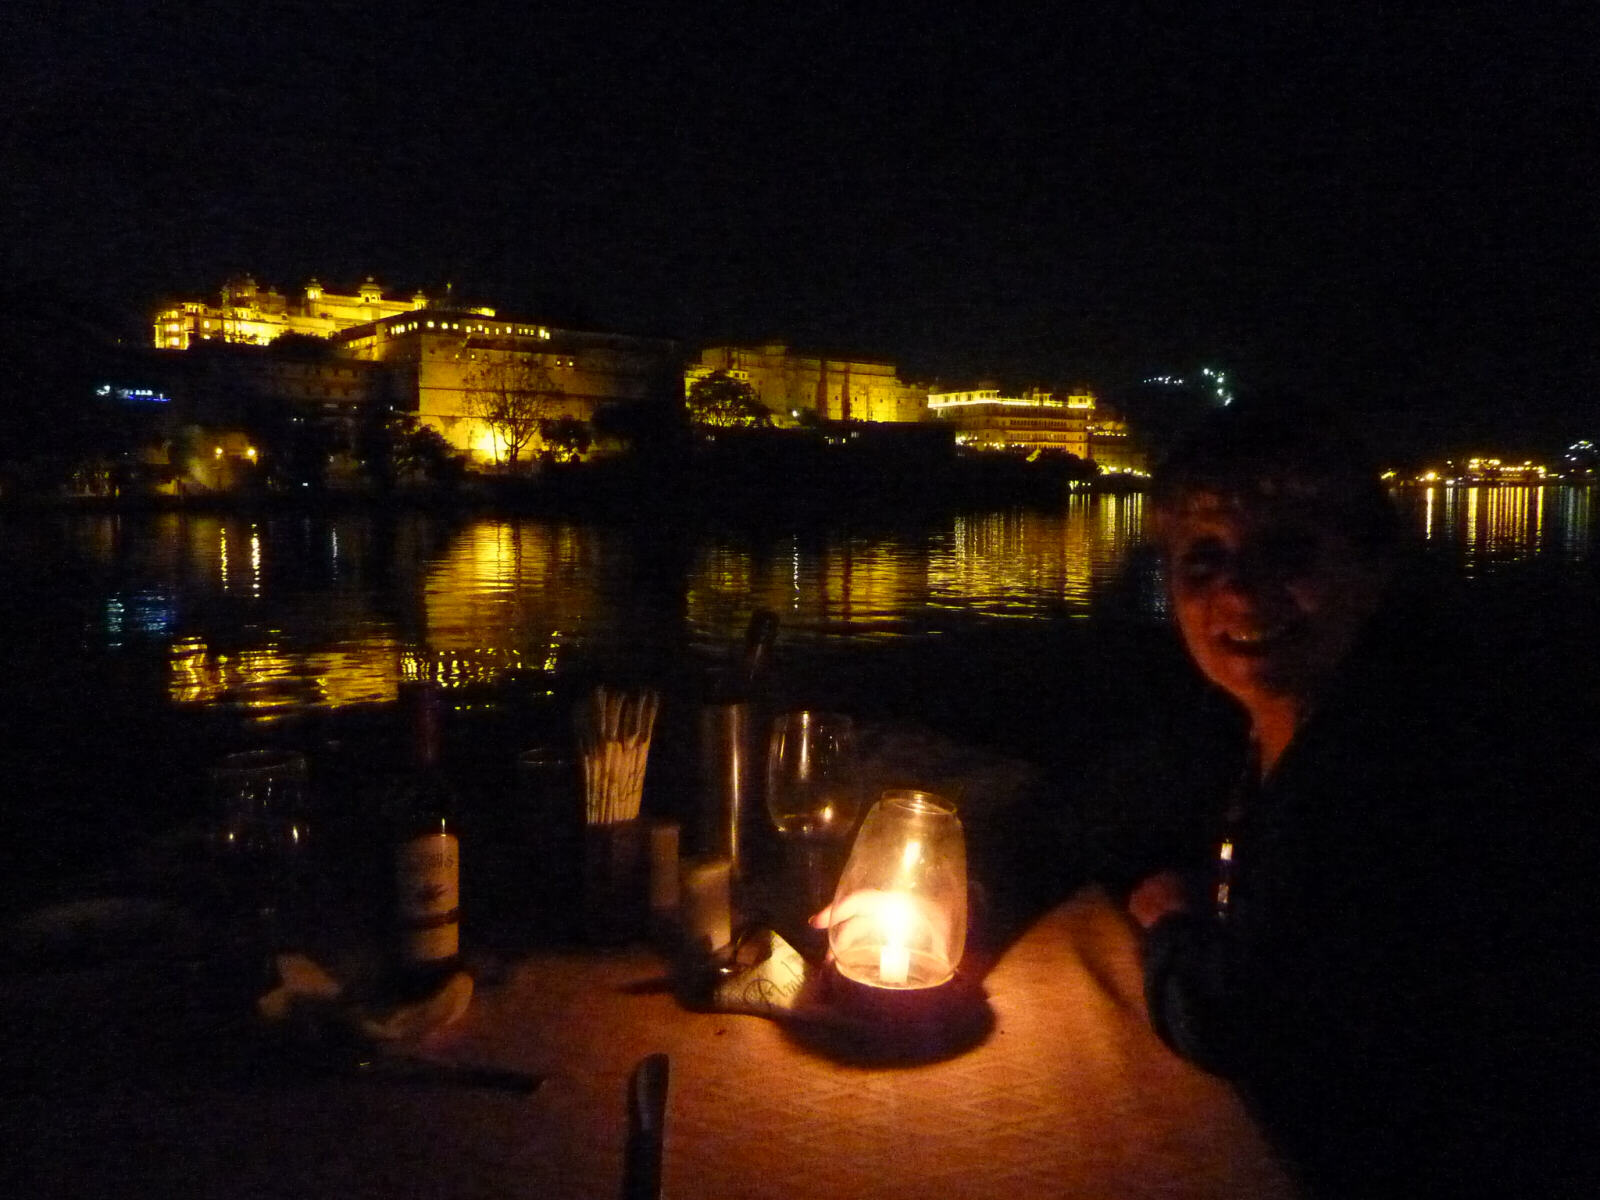 Dinner at the Ambrai restaurant in Udaipur, Rajasthan